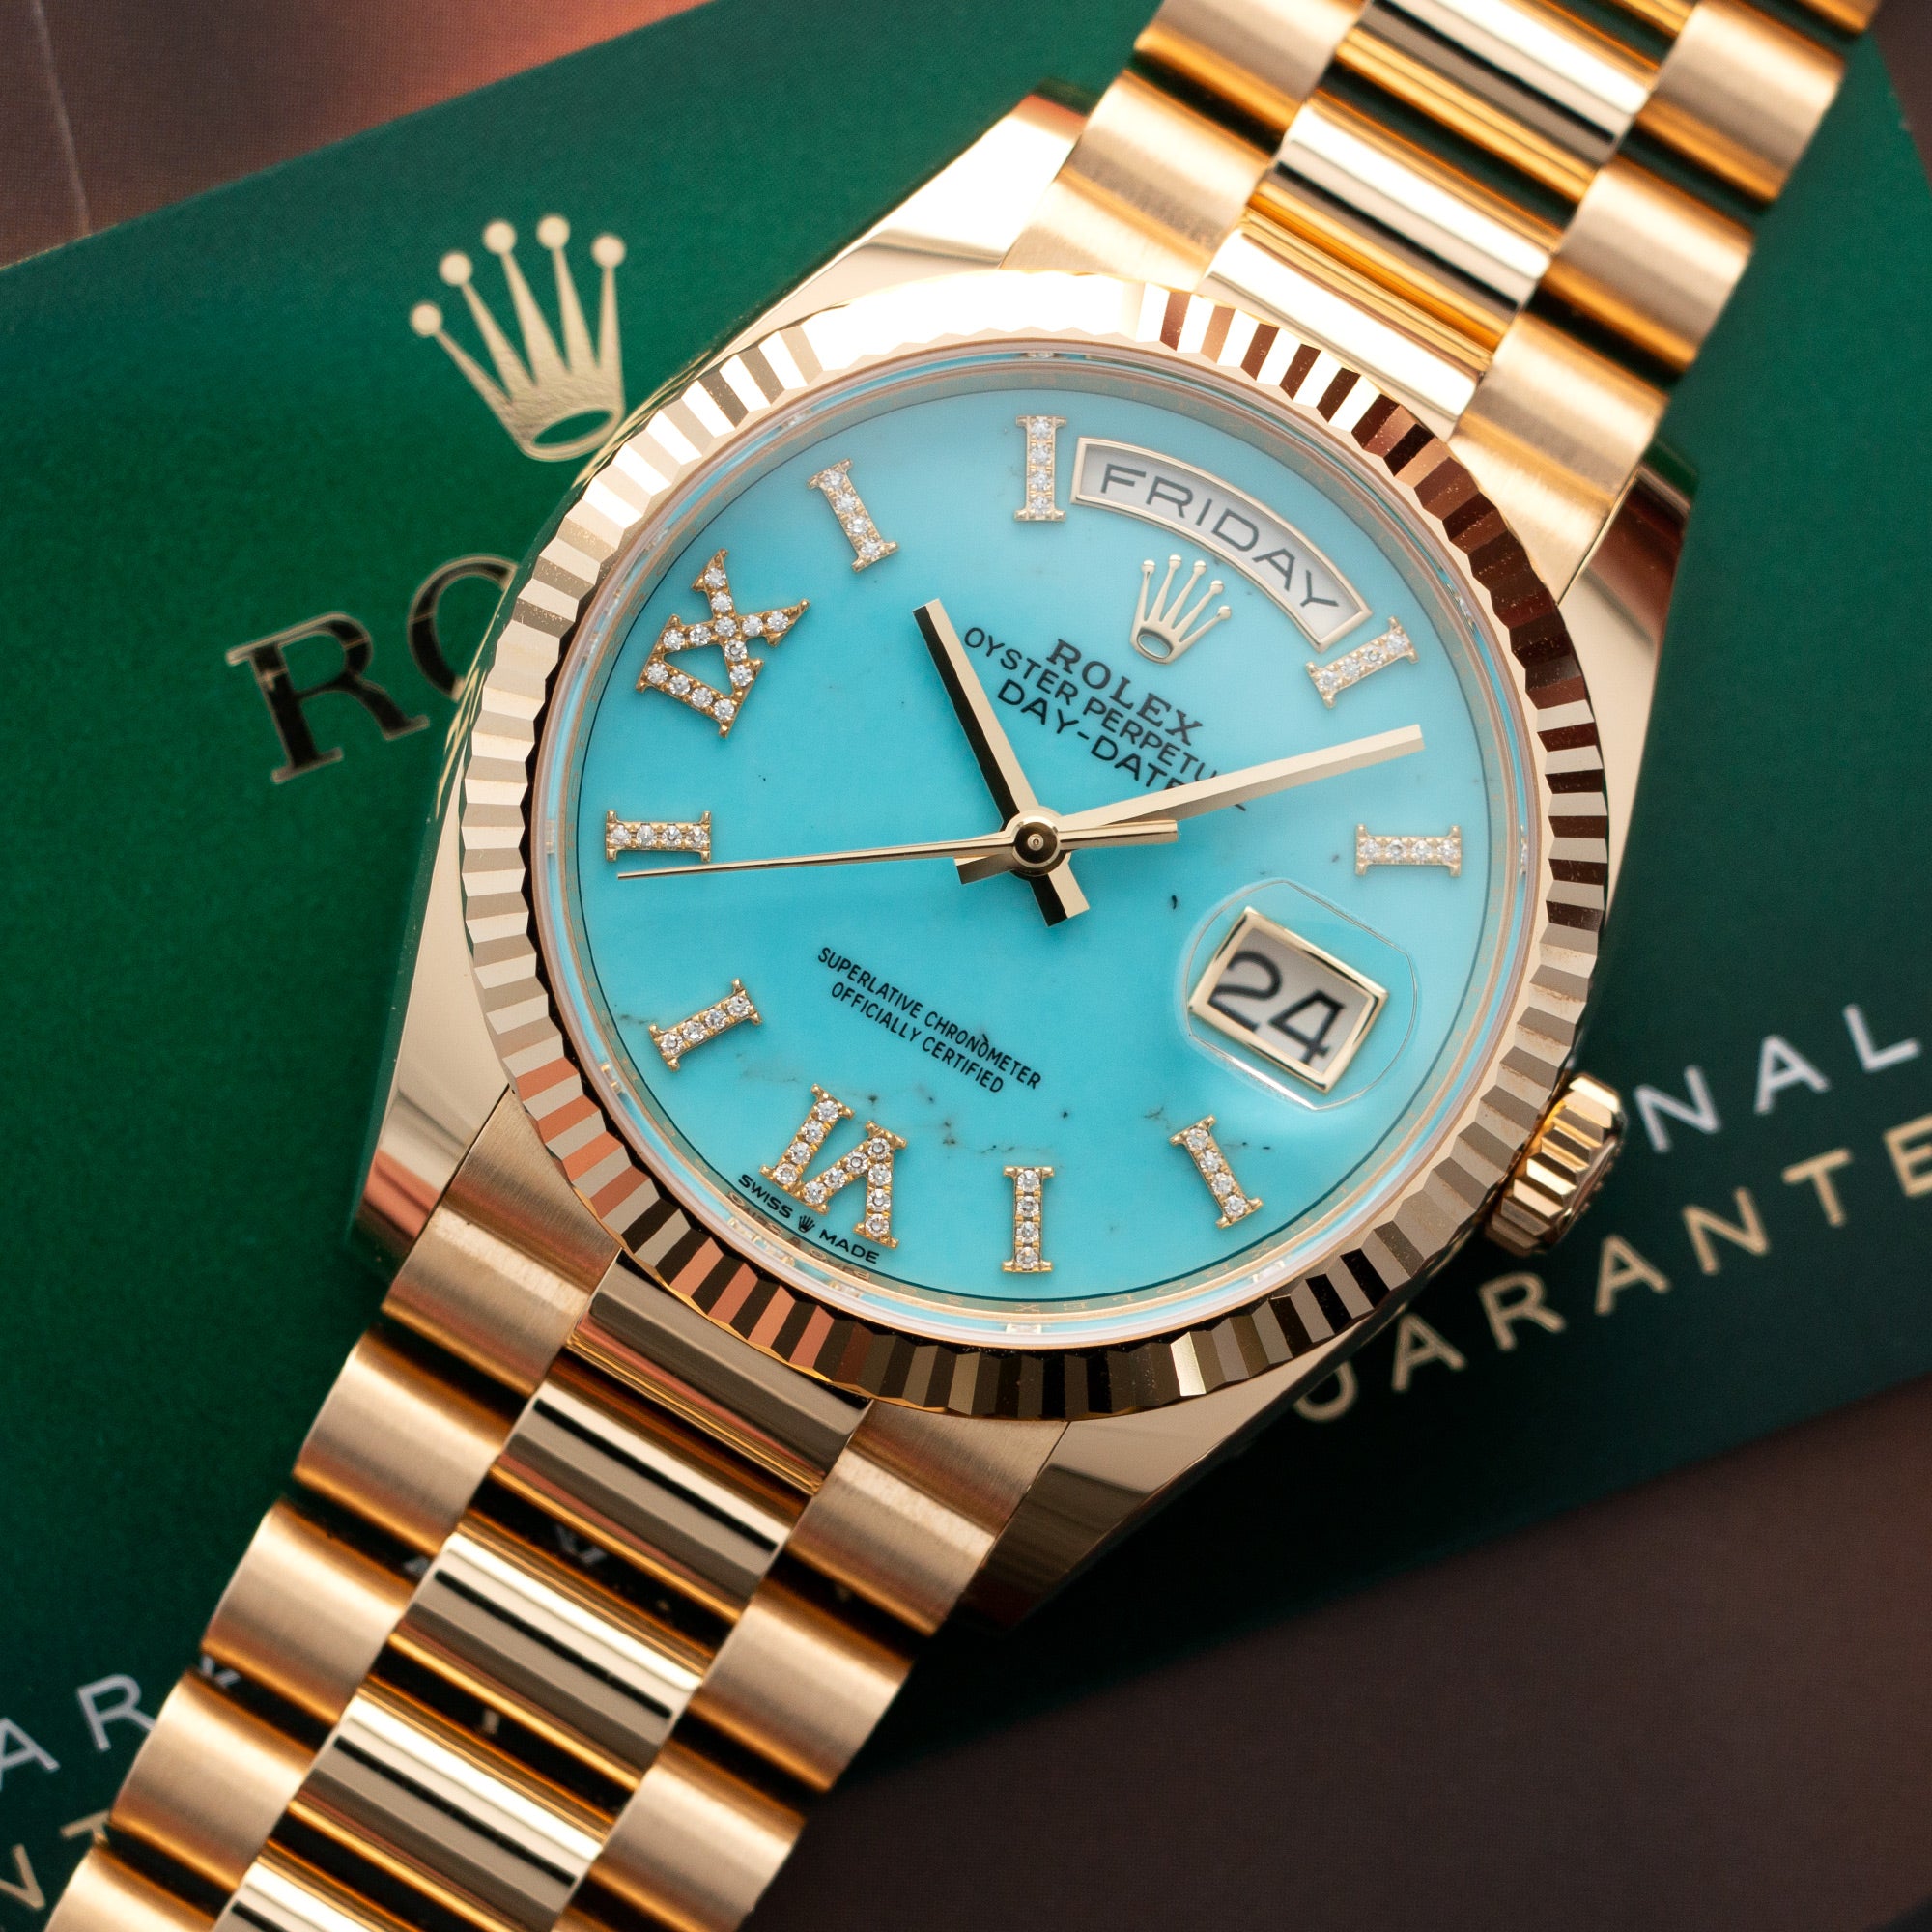 Rolex - Rolex Yellow Gold Day-Date Turquoise Diamond Watch Ref. 128238 - The Keystone Watches